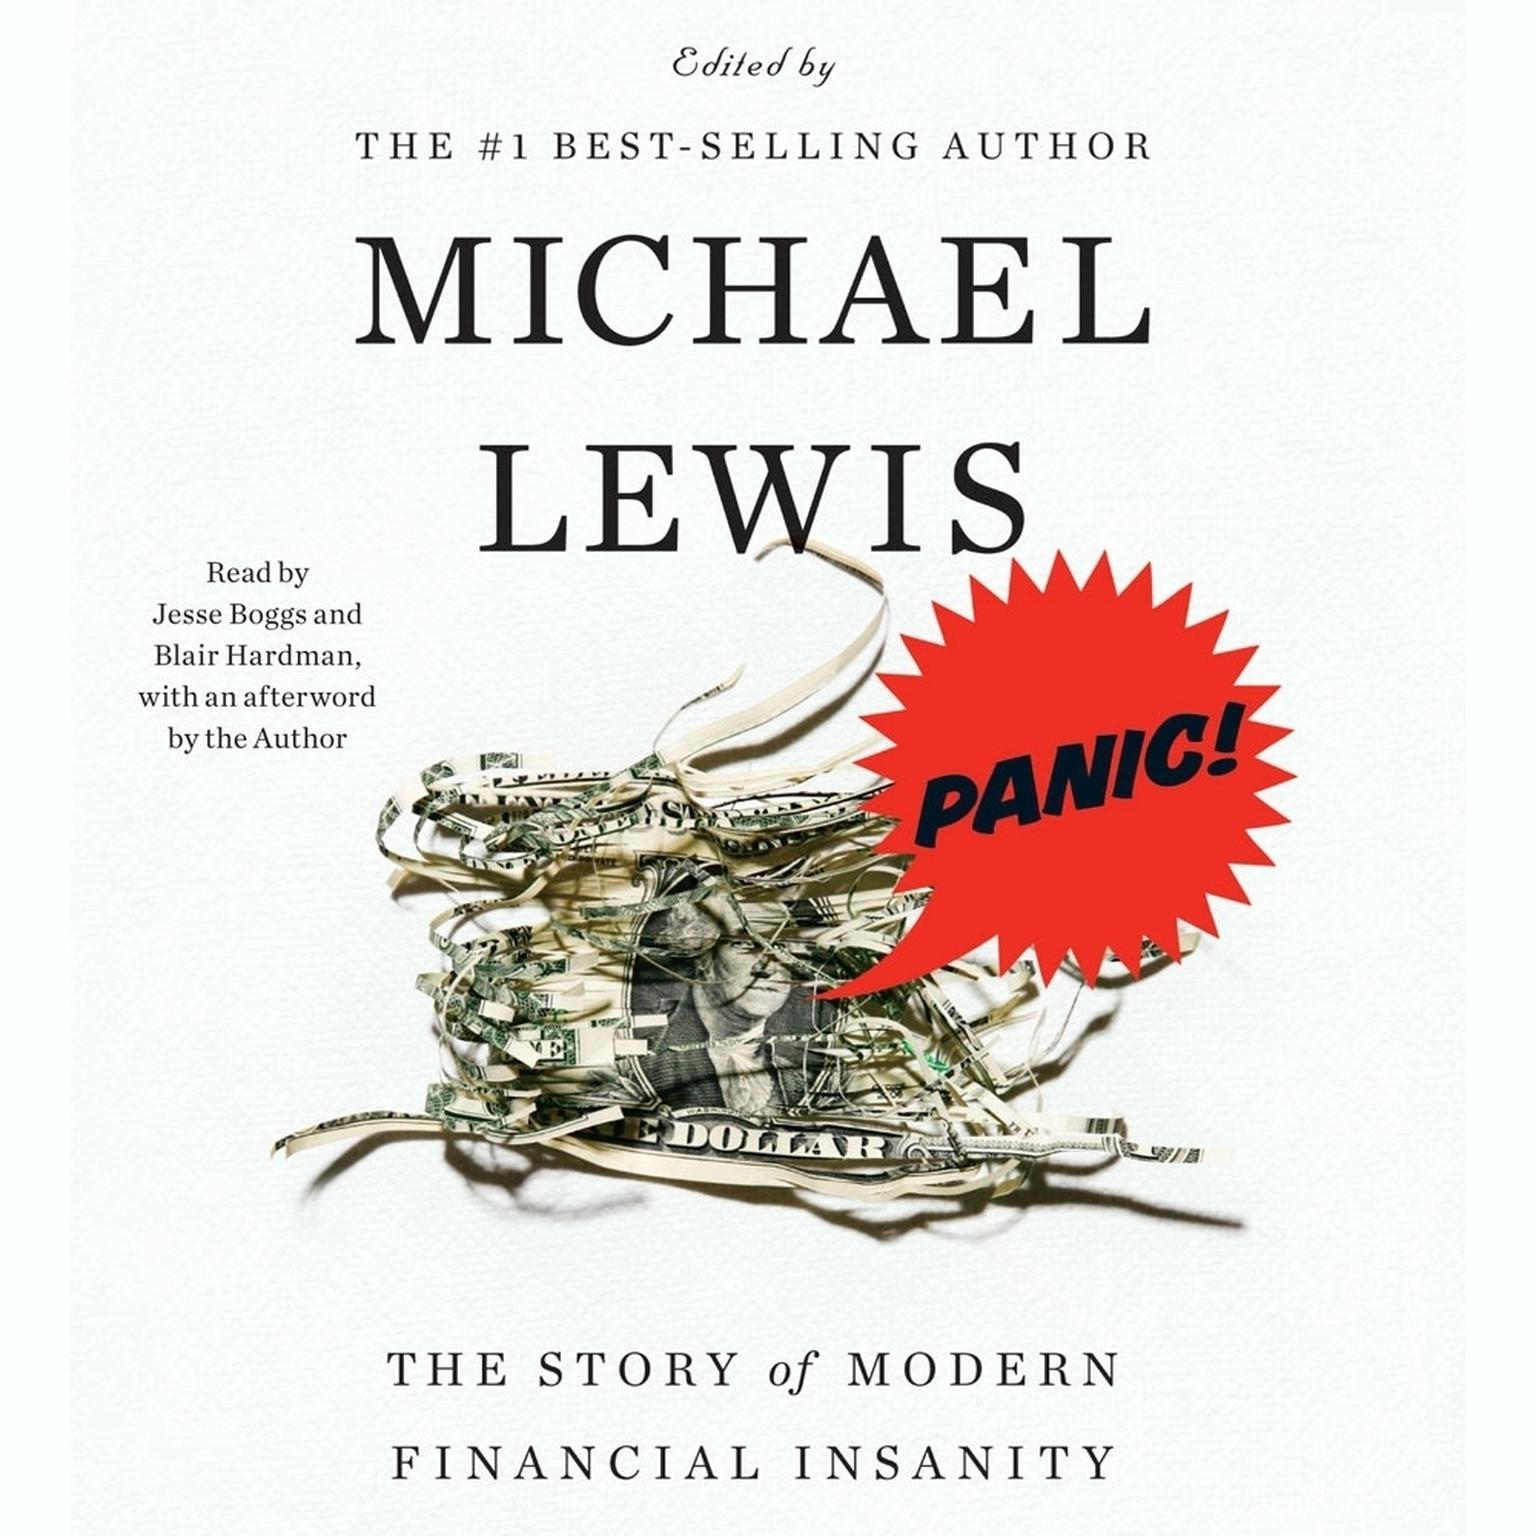 Panic! (Abridged): The Story of Modern Financial Insanity Audiobook, by Michael Lewis